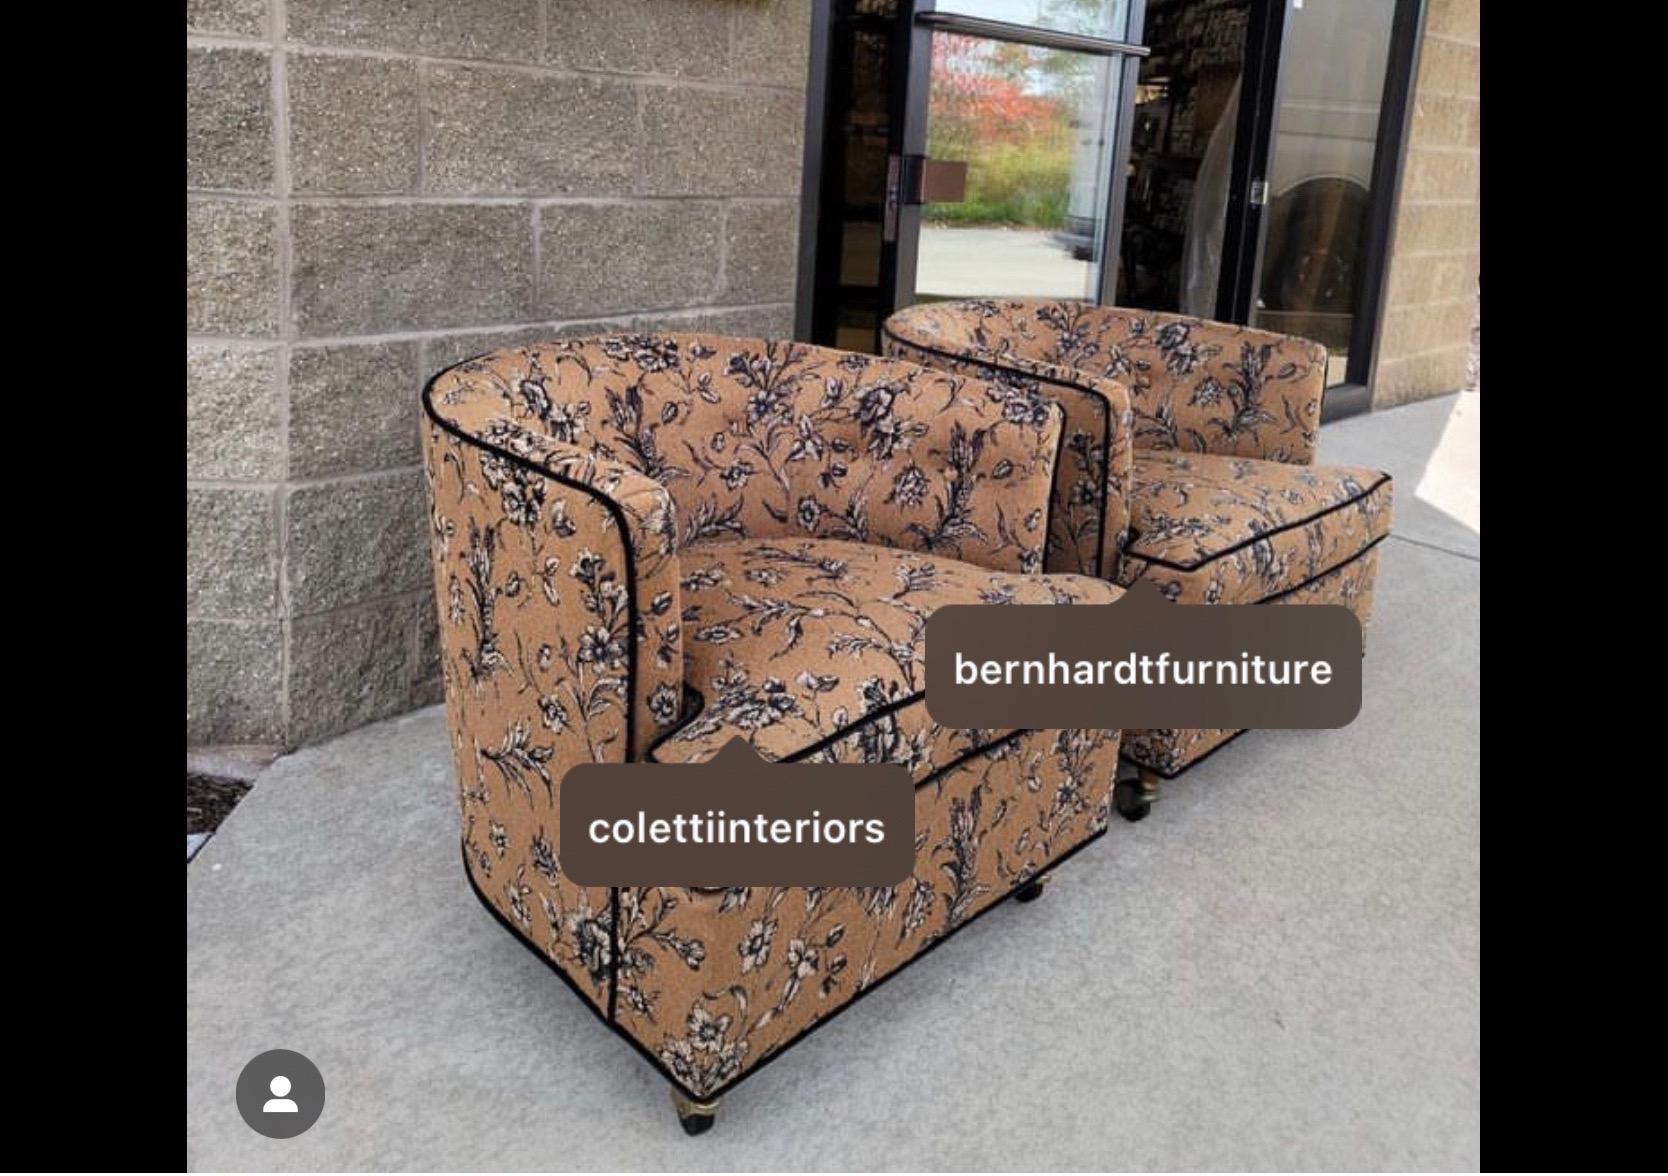 Just back from the Upholstery Wizards for a complete and professional renovation these Flair by Bernhardt 1960s Club chairs are wrapped in a decadent Kravet Damask upholstery fabric in Bronze, tan and black. Spectacular in person! One owner find.